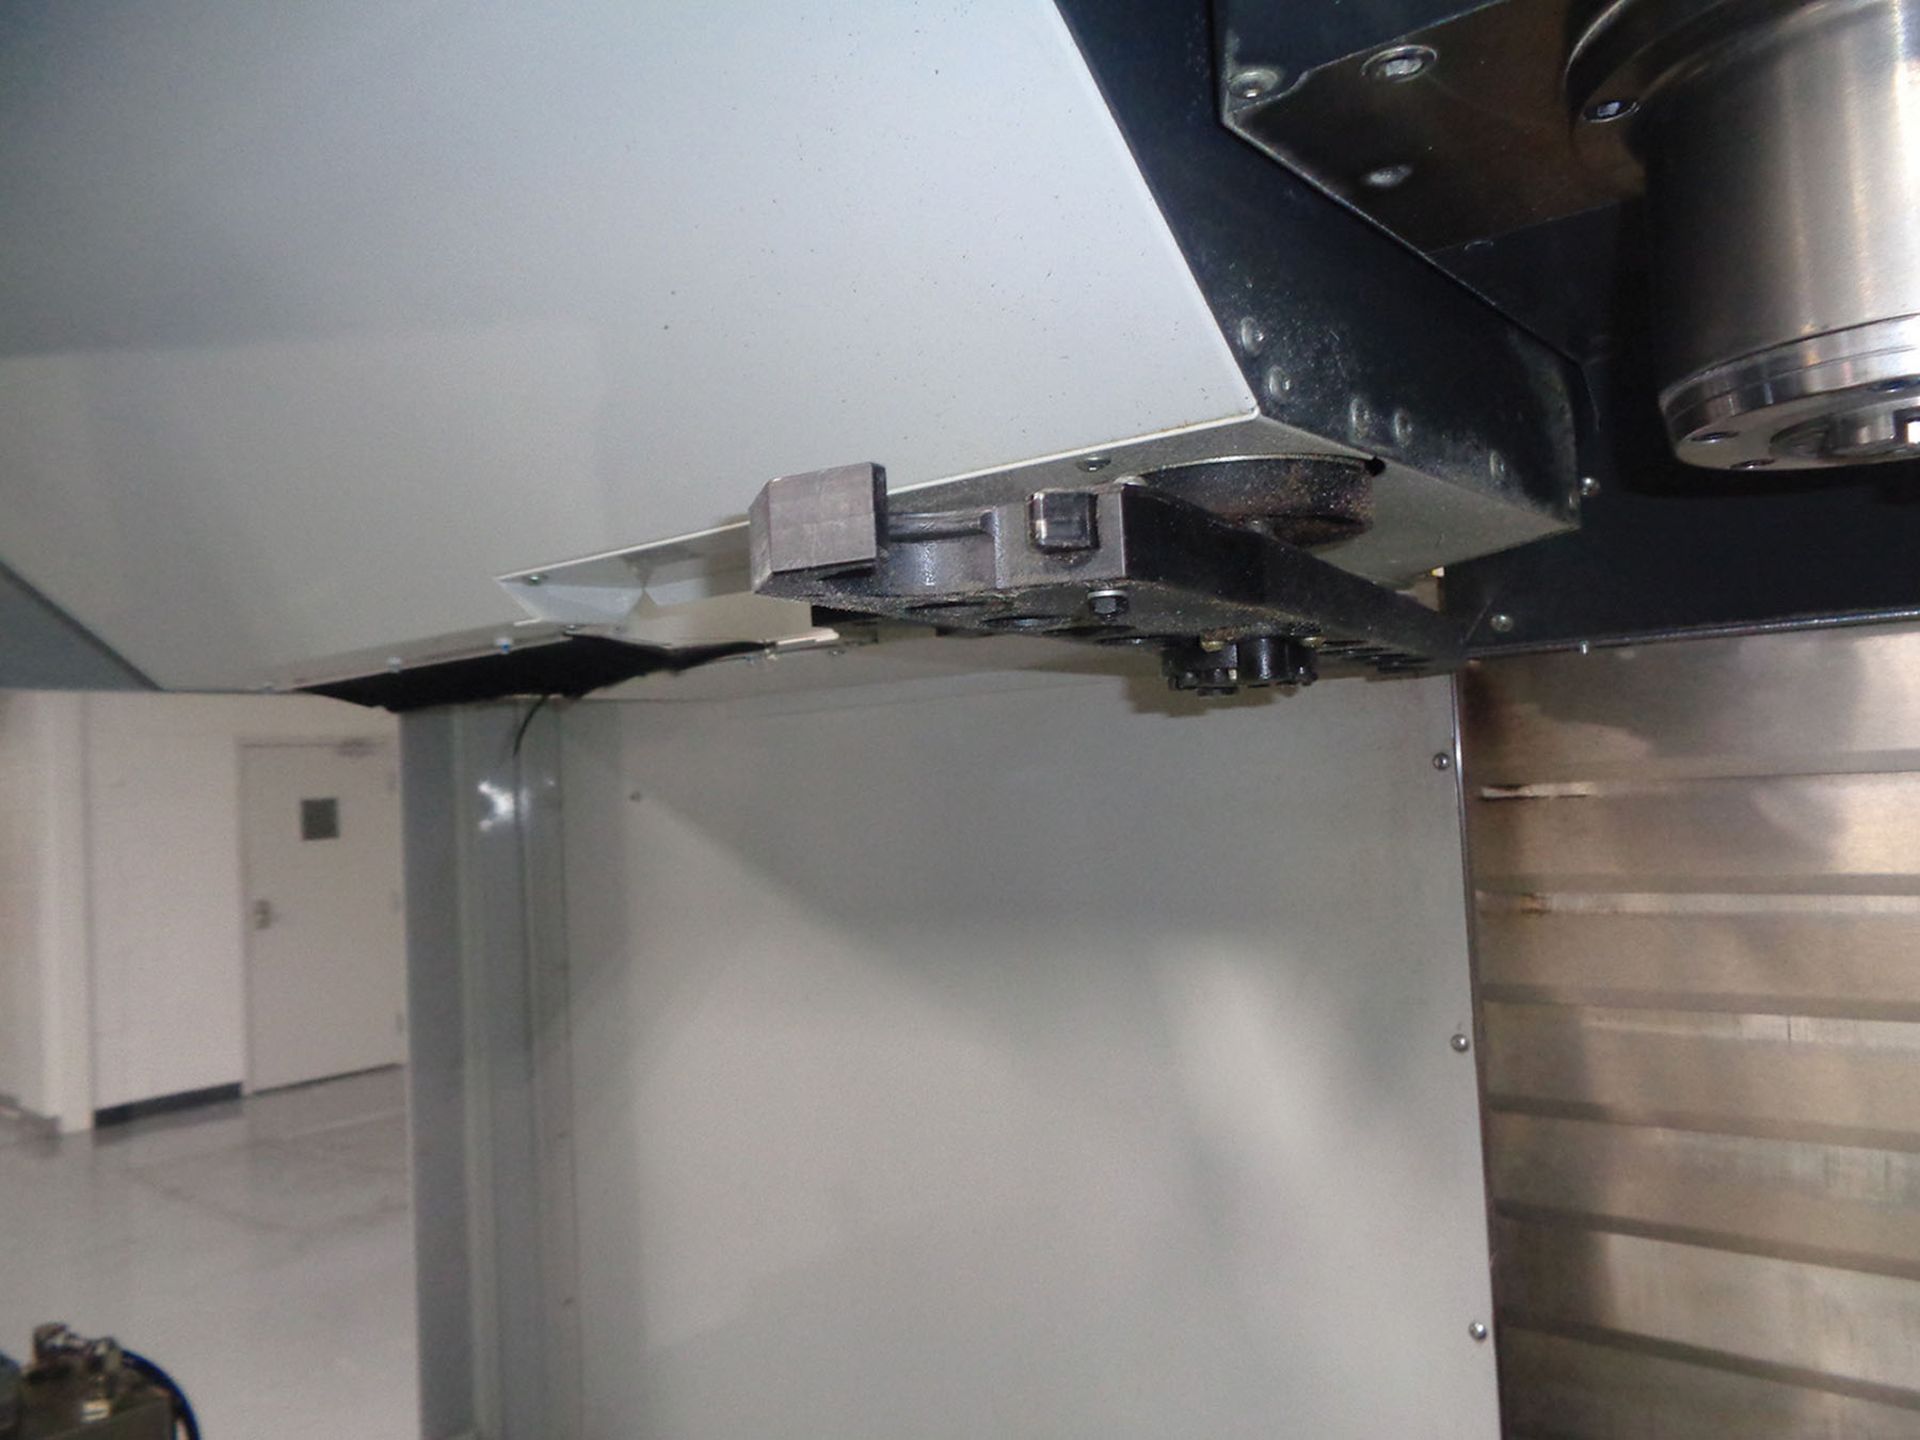 2013 HAAS VF-3 CNC VMC; S/N 1107879, TRAVELS X-40'', Y-20'', Z-25'', 24-TOOL SIDE MOUNTED ATC, 15, - Image 2 of 6